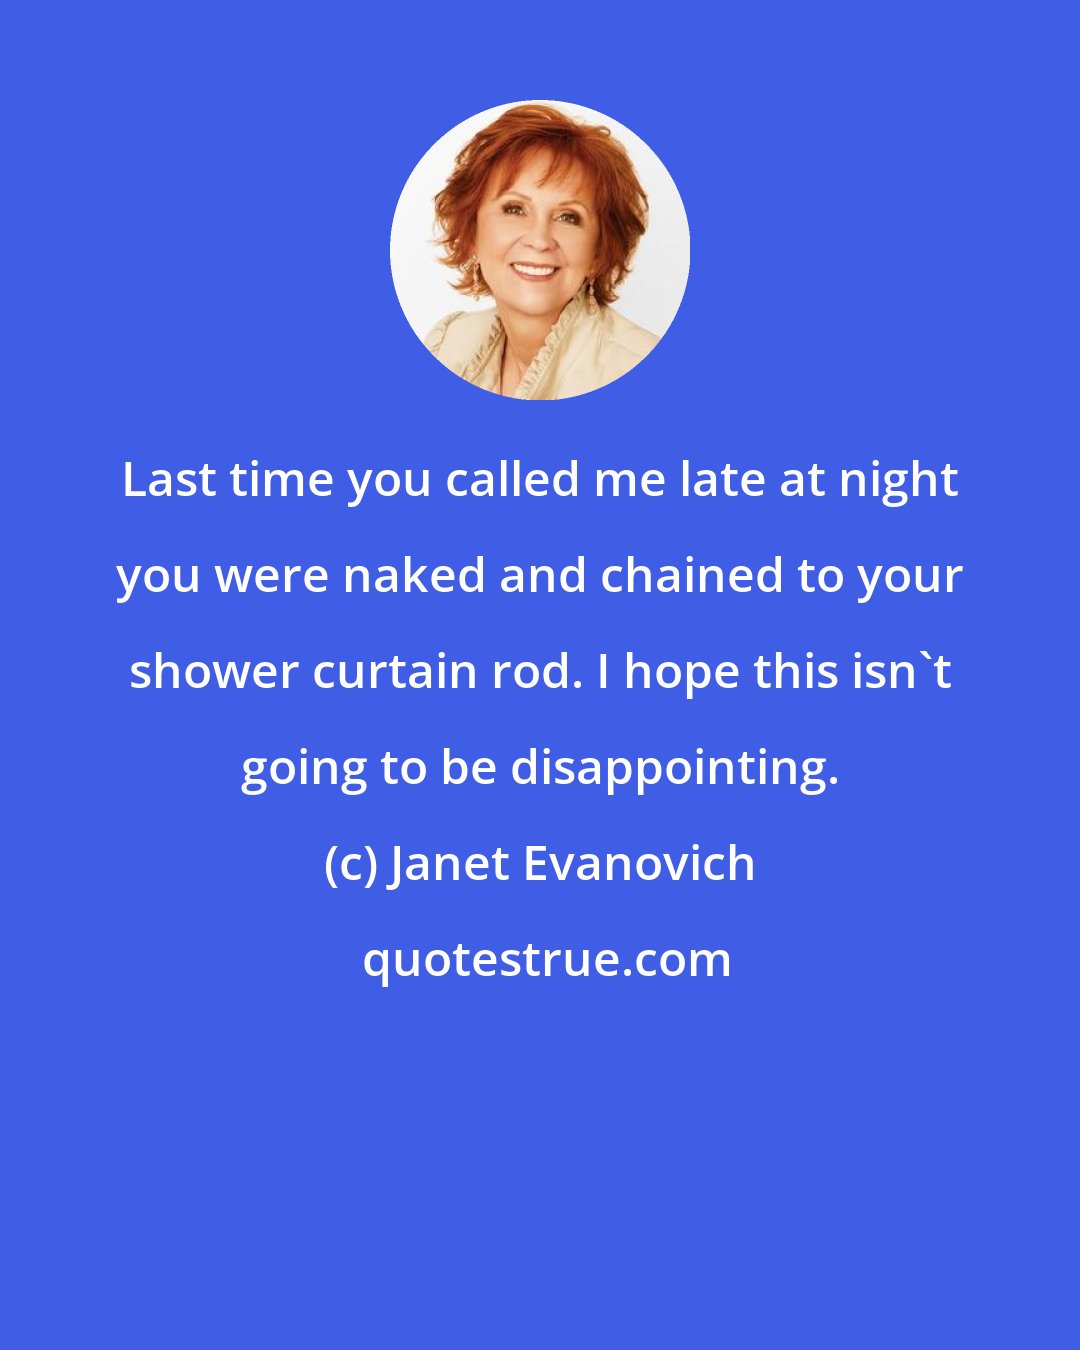 Janet Evanovich: Last time you called me late at night you were naked and chained to your shower curtain rod. I hope this isn't going to be disappointing.